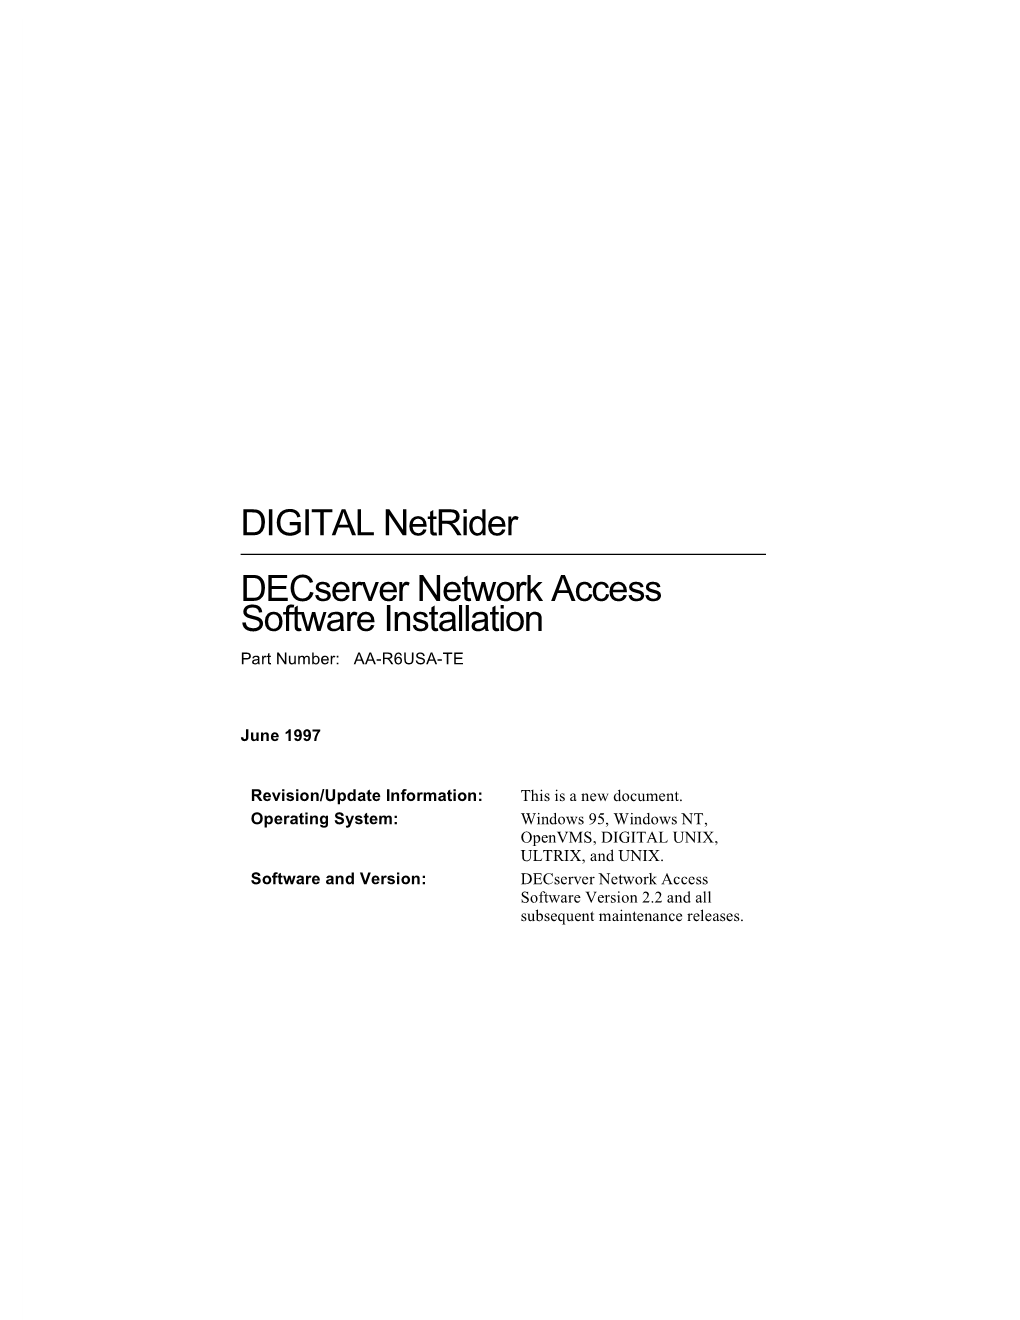 DIGITAL Netrider Decserver Network Access Software Installation Part Number: AA-R6USA-TE